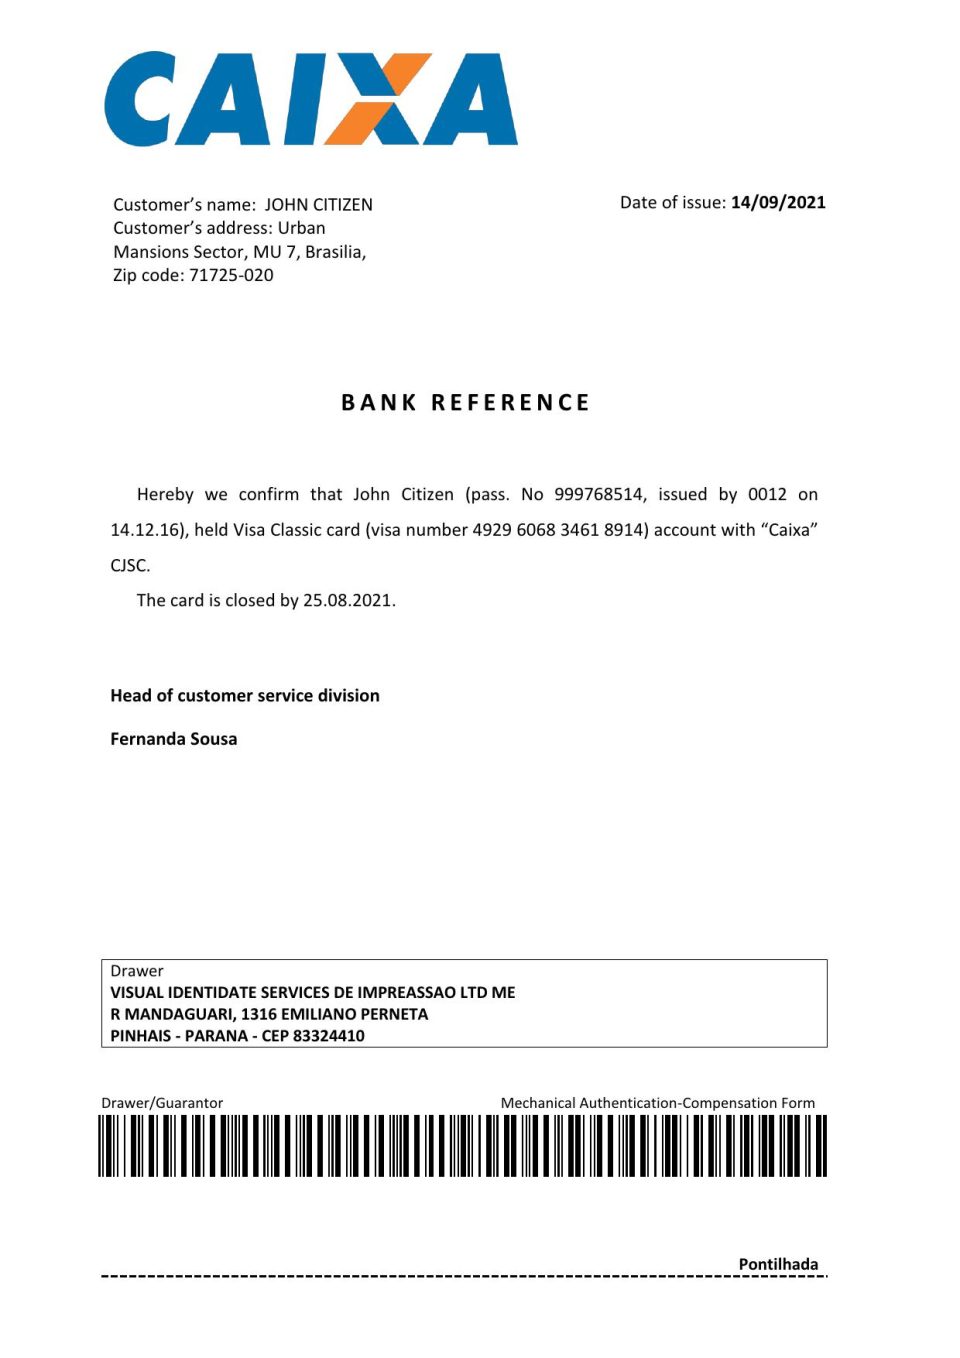 Brazil Caixa bank account closure reference letter template in Word and PDF format